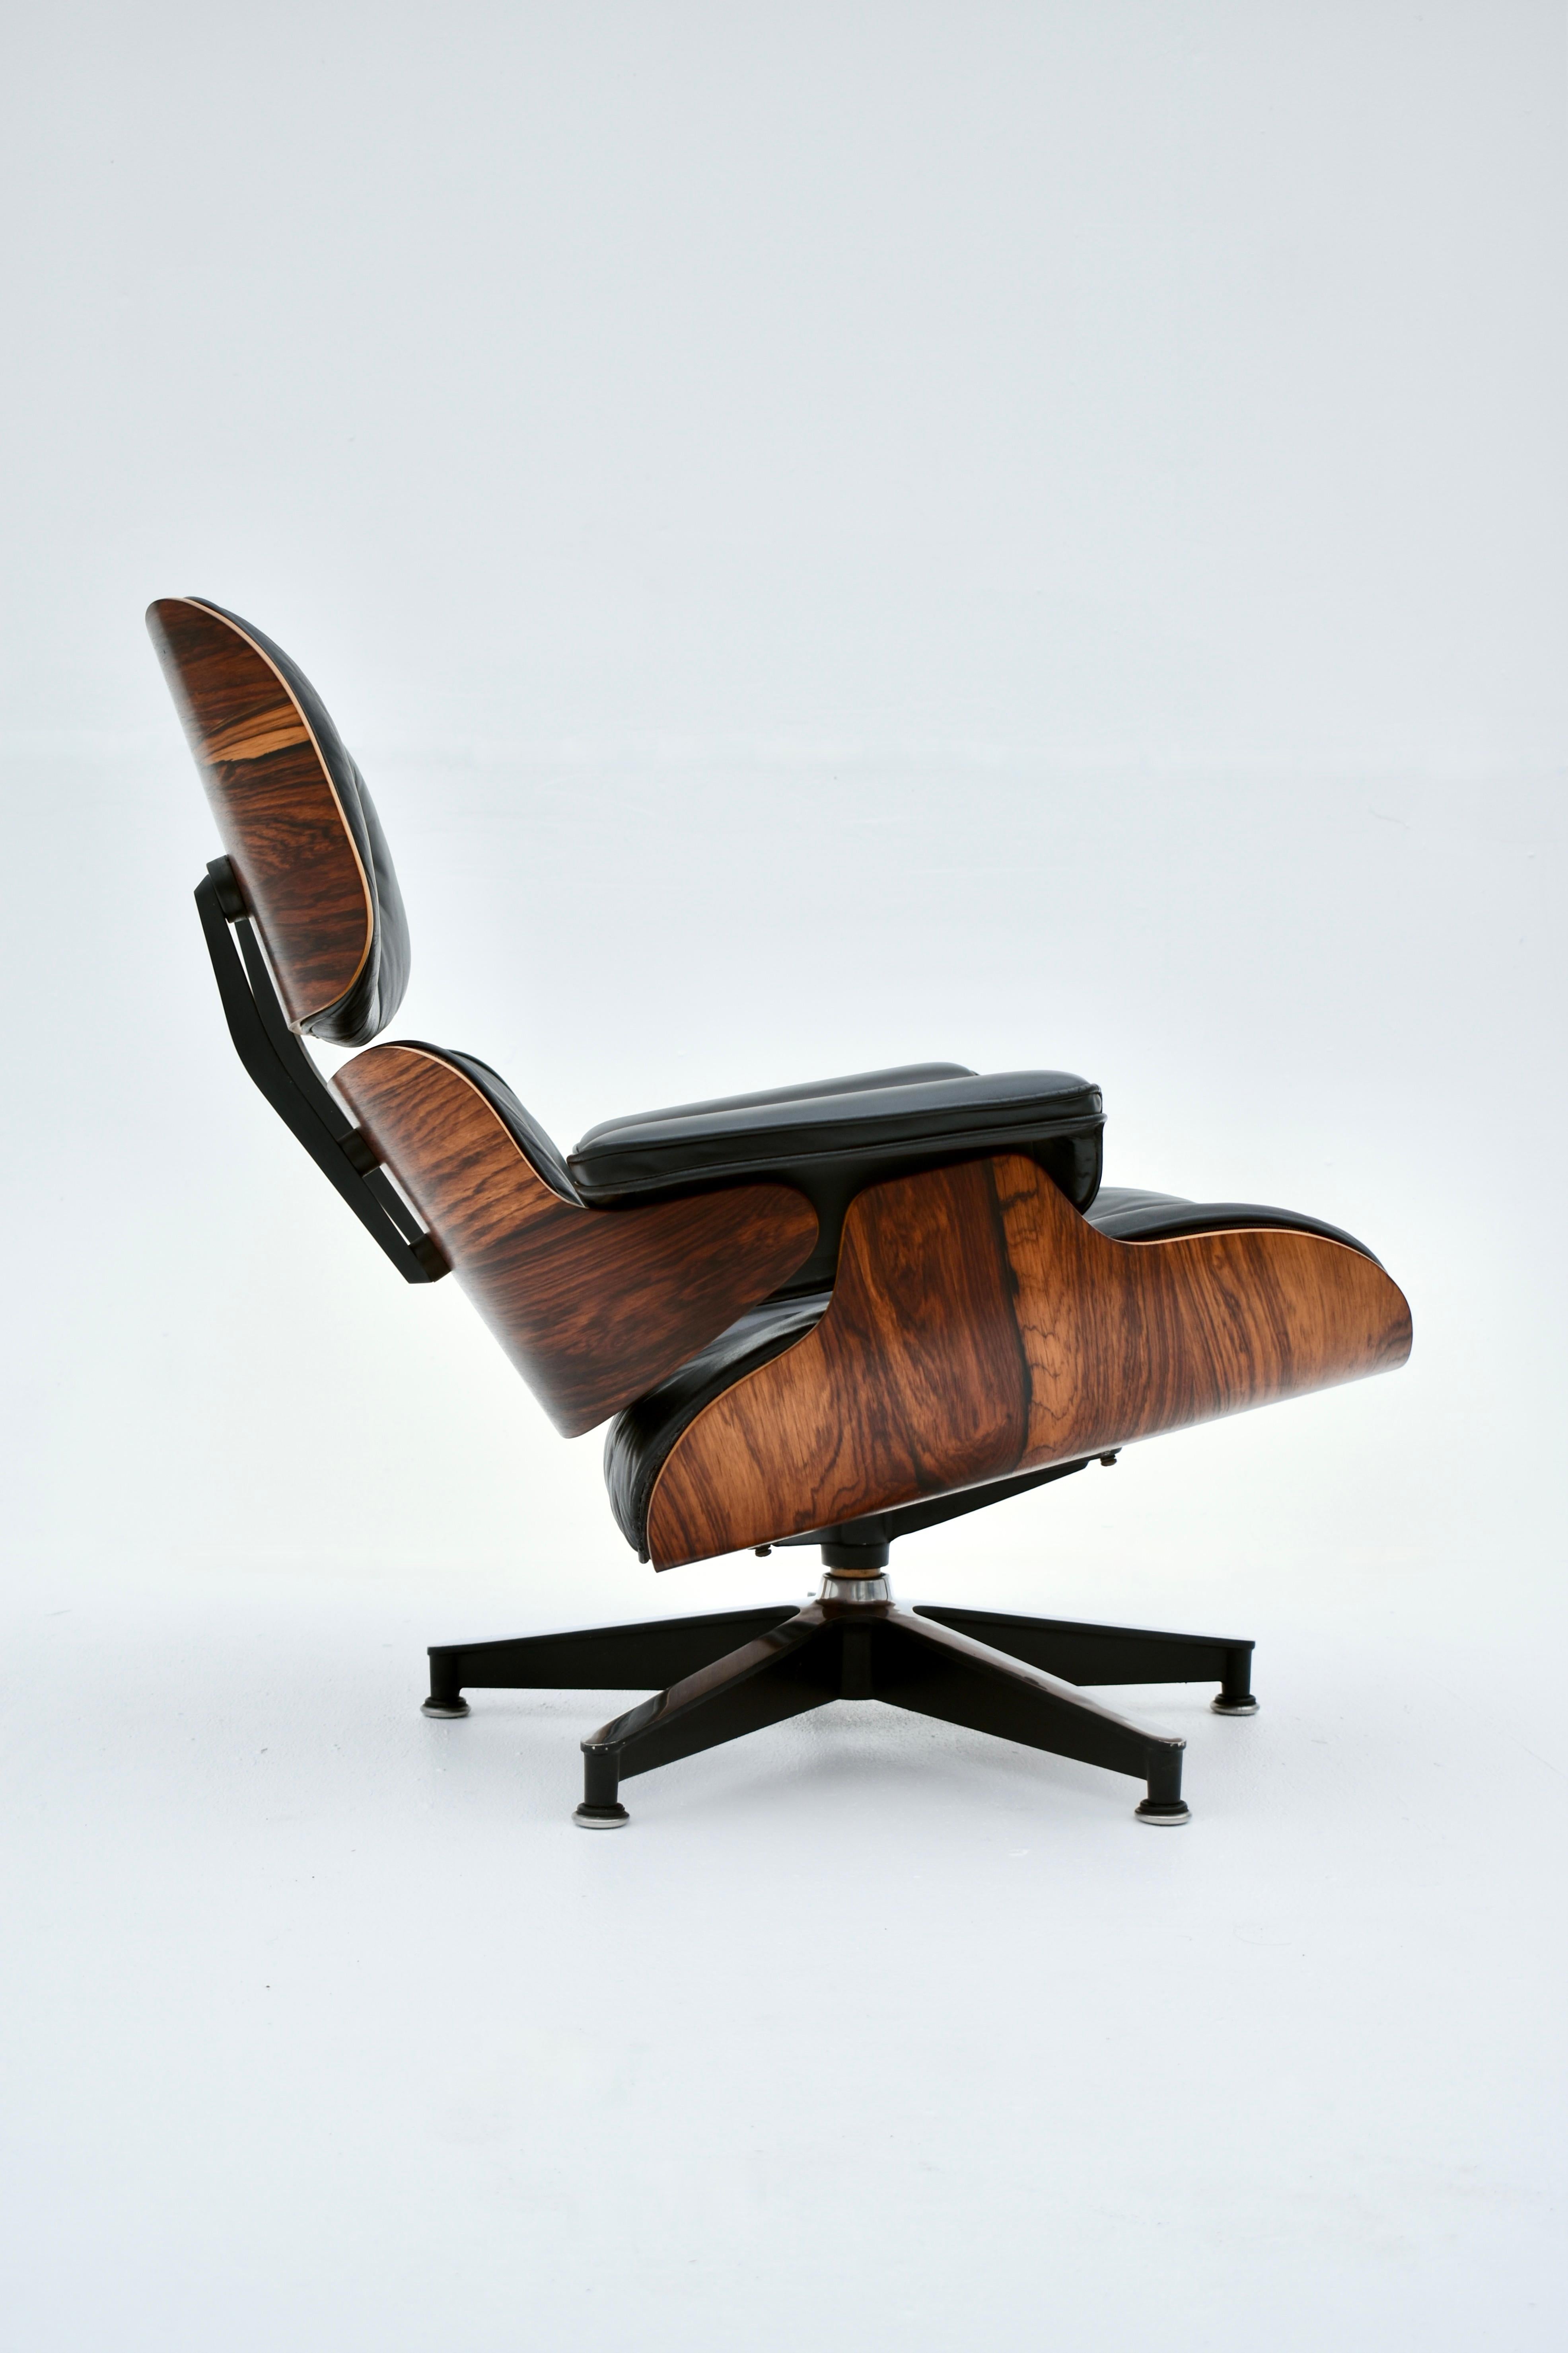 Original 1960's Production Eames Lounge Chair For Herman Miller 2